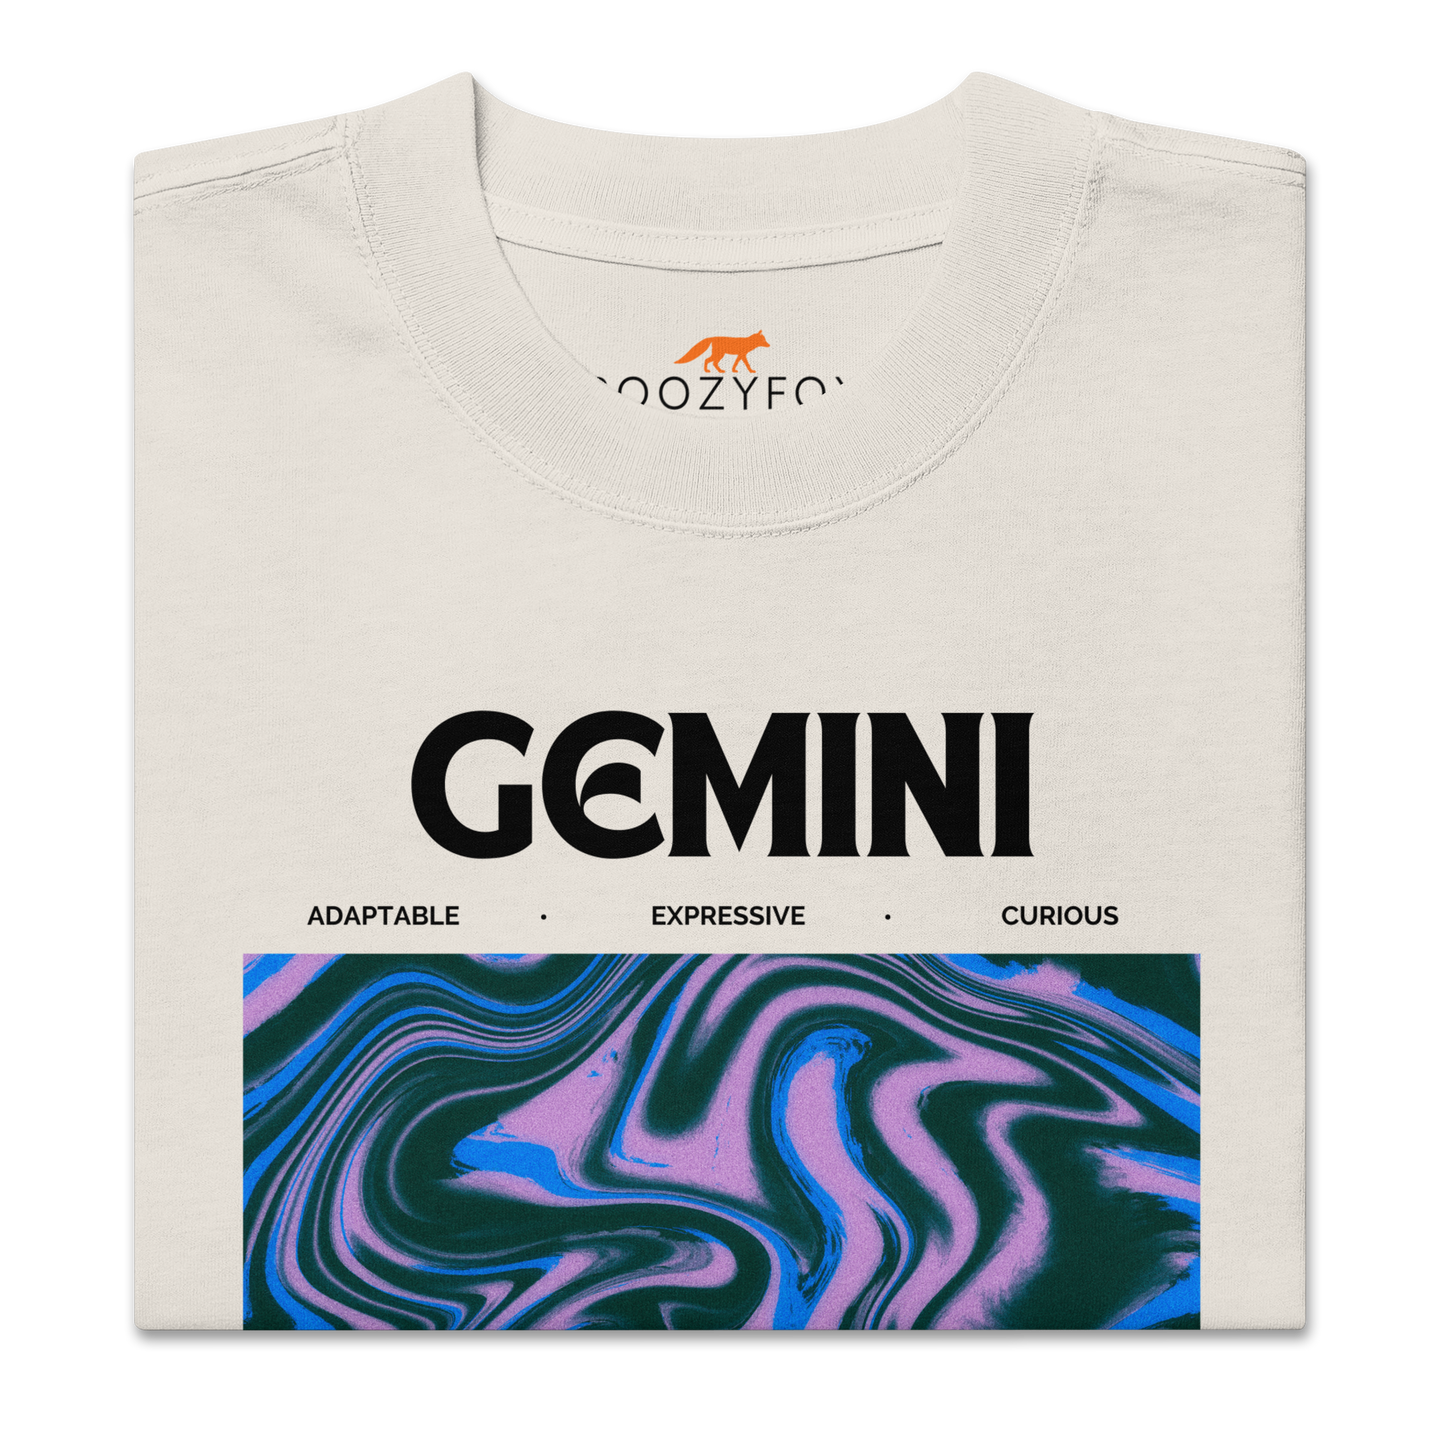 Front details of a Faded Bone Gemini Oversized T-Shirt featuring an Abstract Gemini Star Sign graphic on the chest - Cool Graphic Zodiac Oversized Tees - Boozy Fox